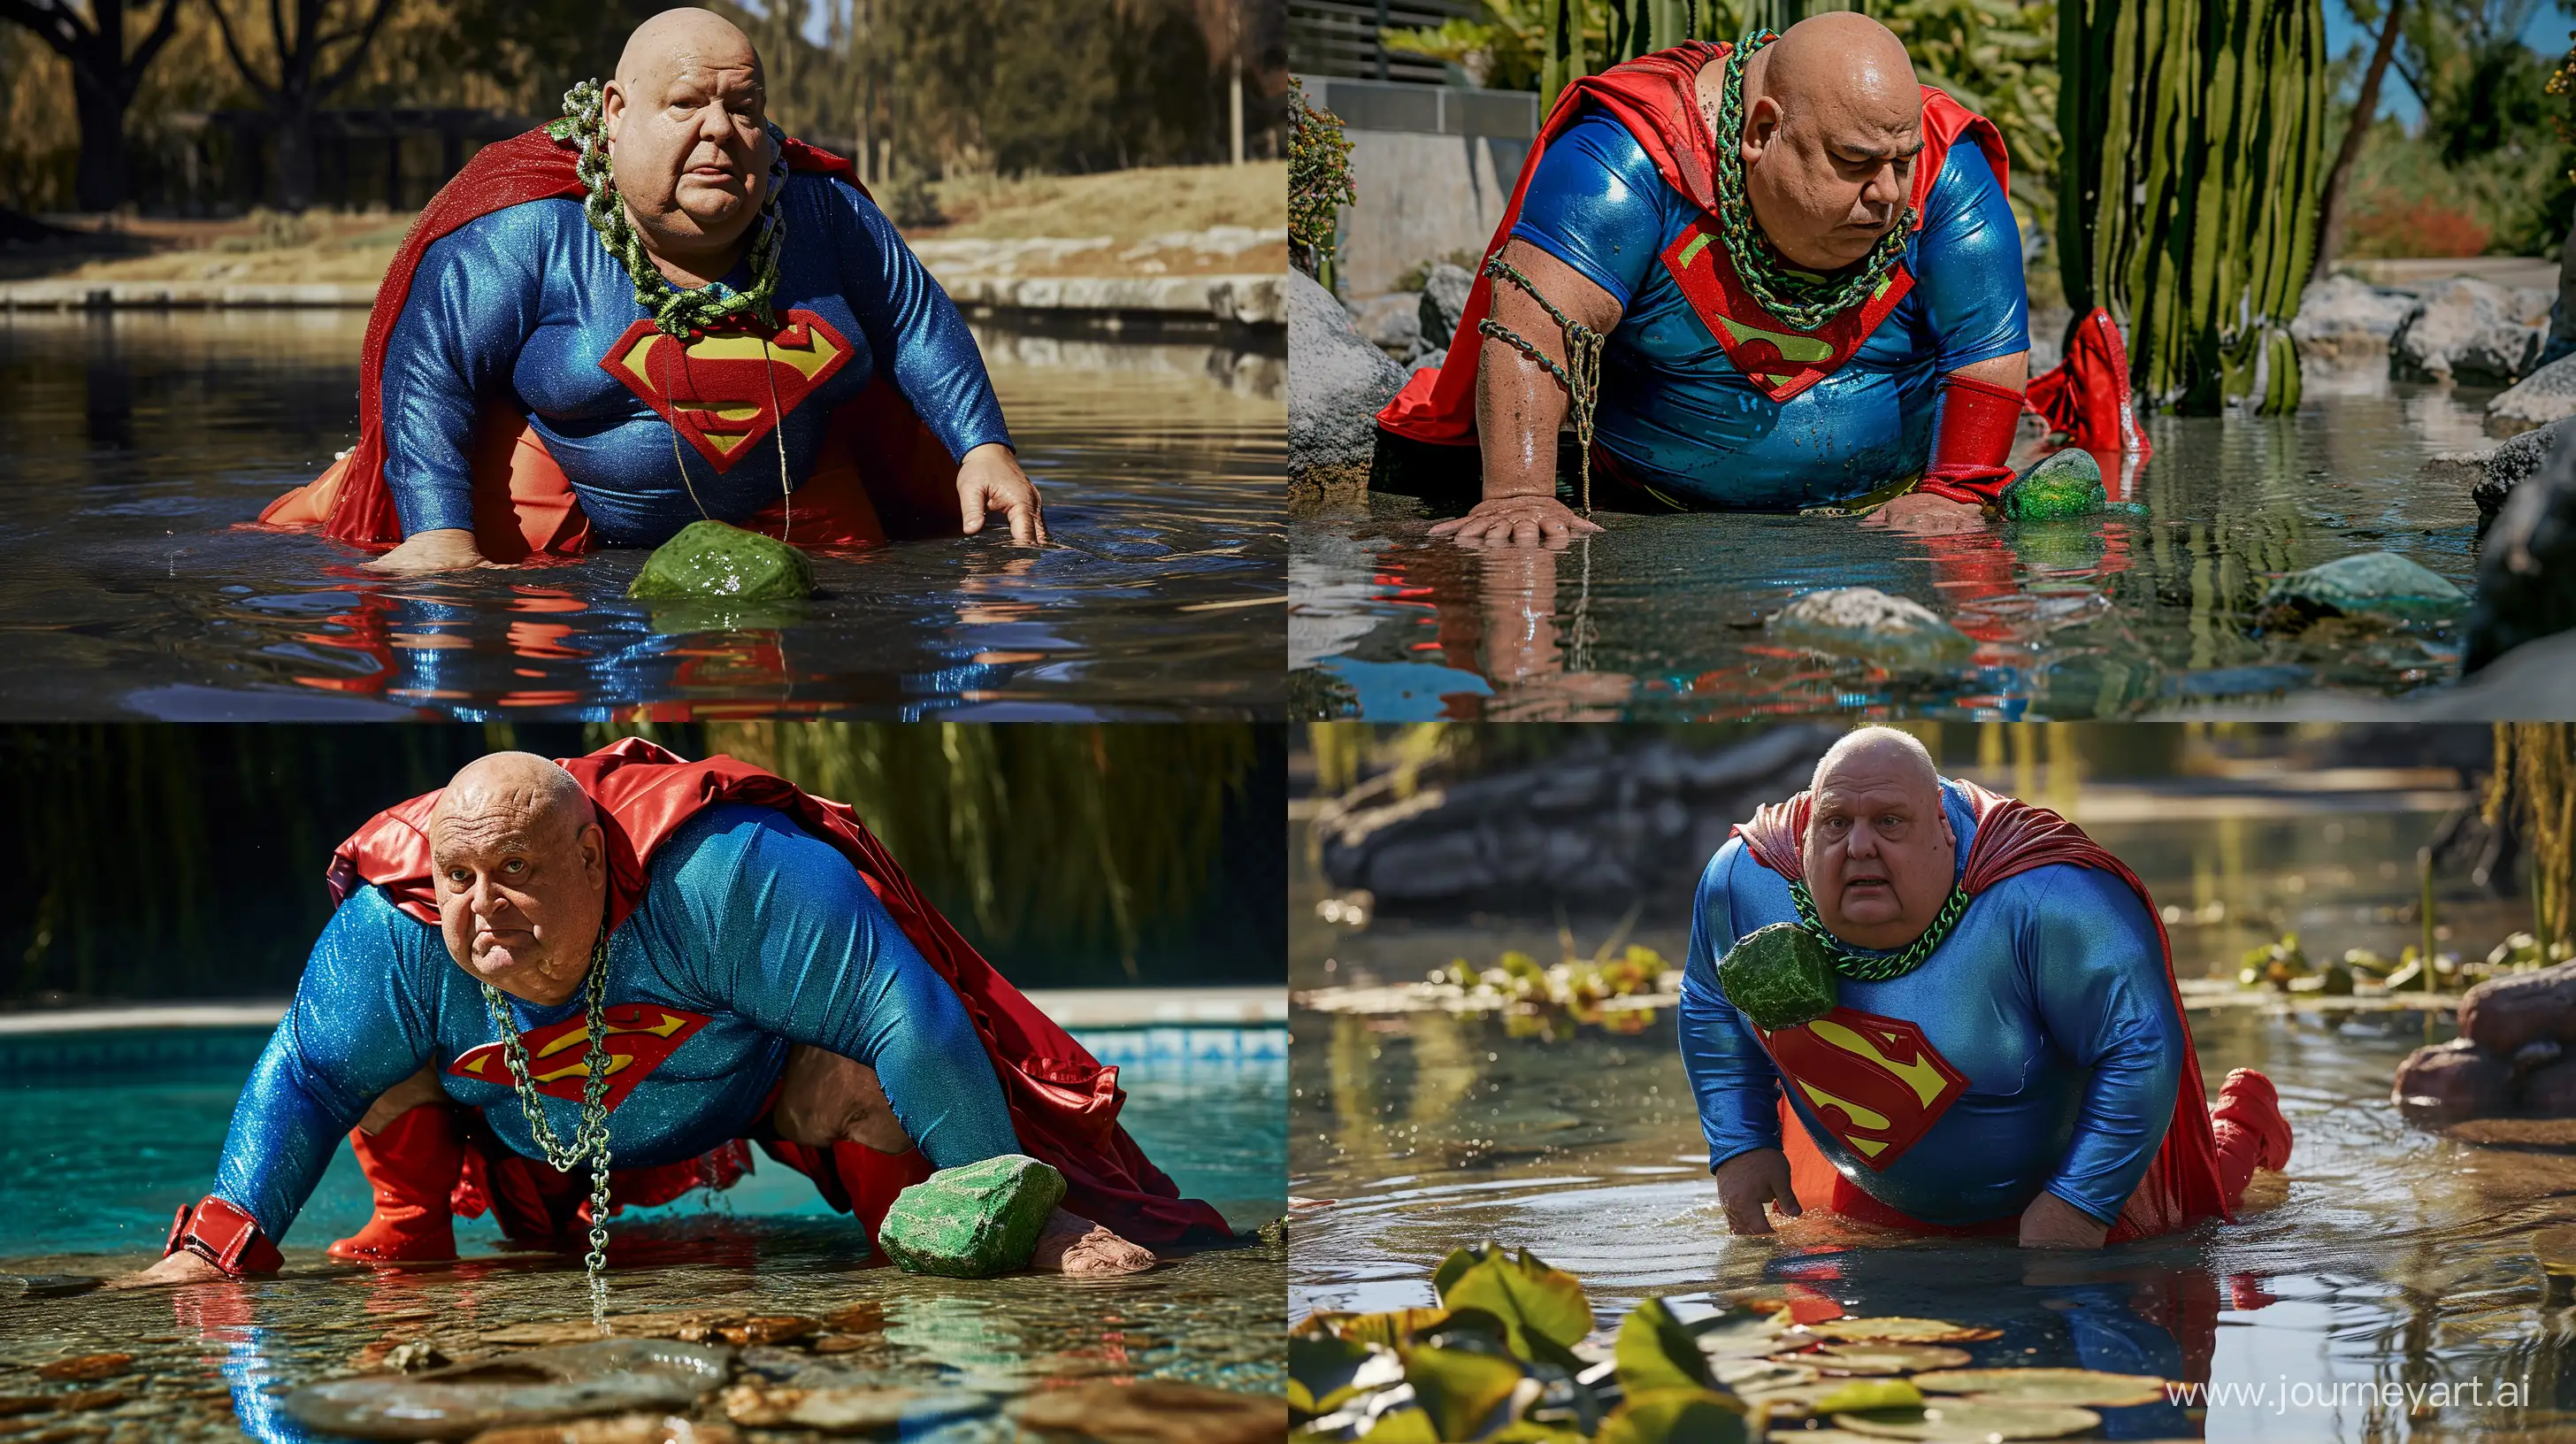 Playful-Elderly-Man-in-Vibrant-Superman-Costume-Crawling-in-Shallow-Pool